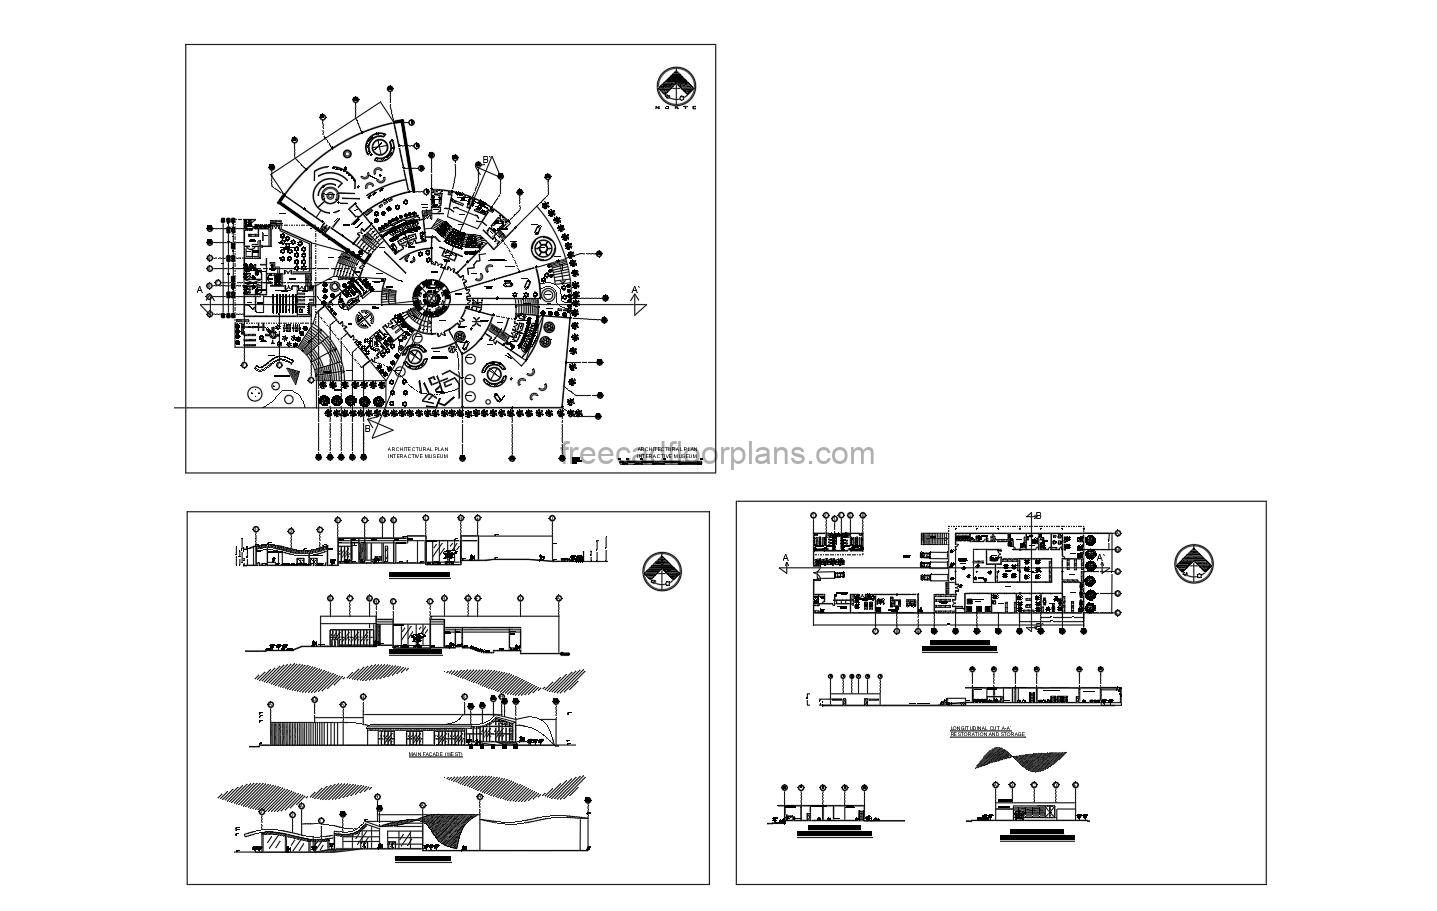 complete project of museum history and workshop, dwg Autocad format files for free download